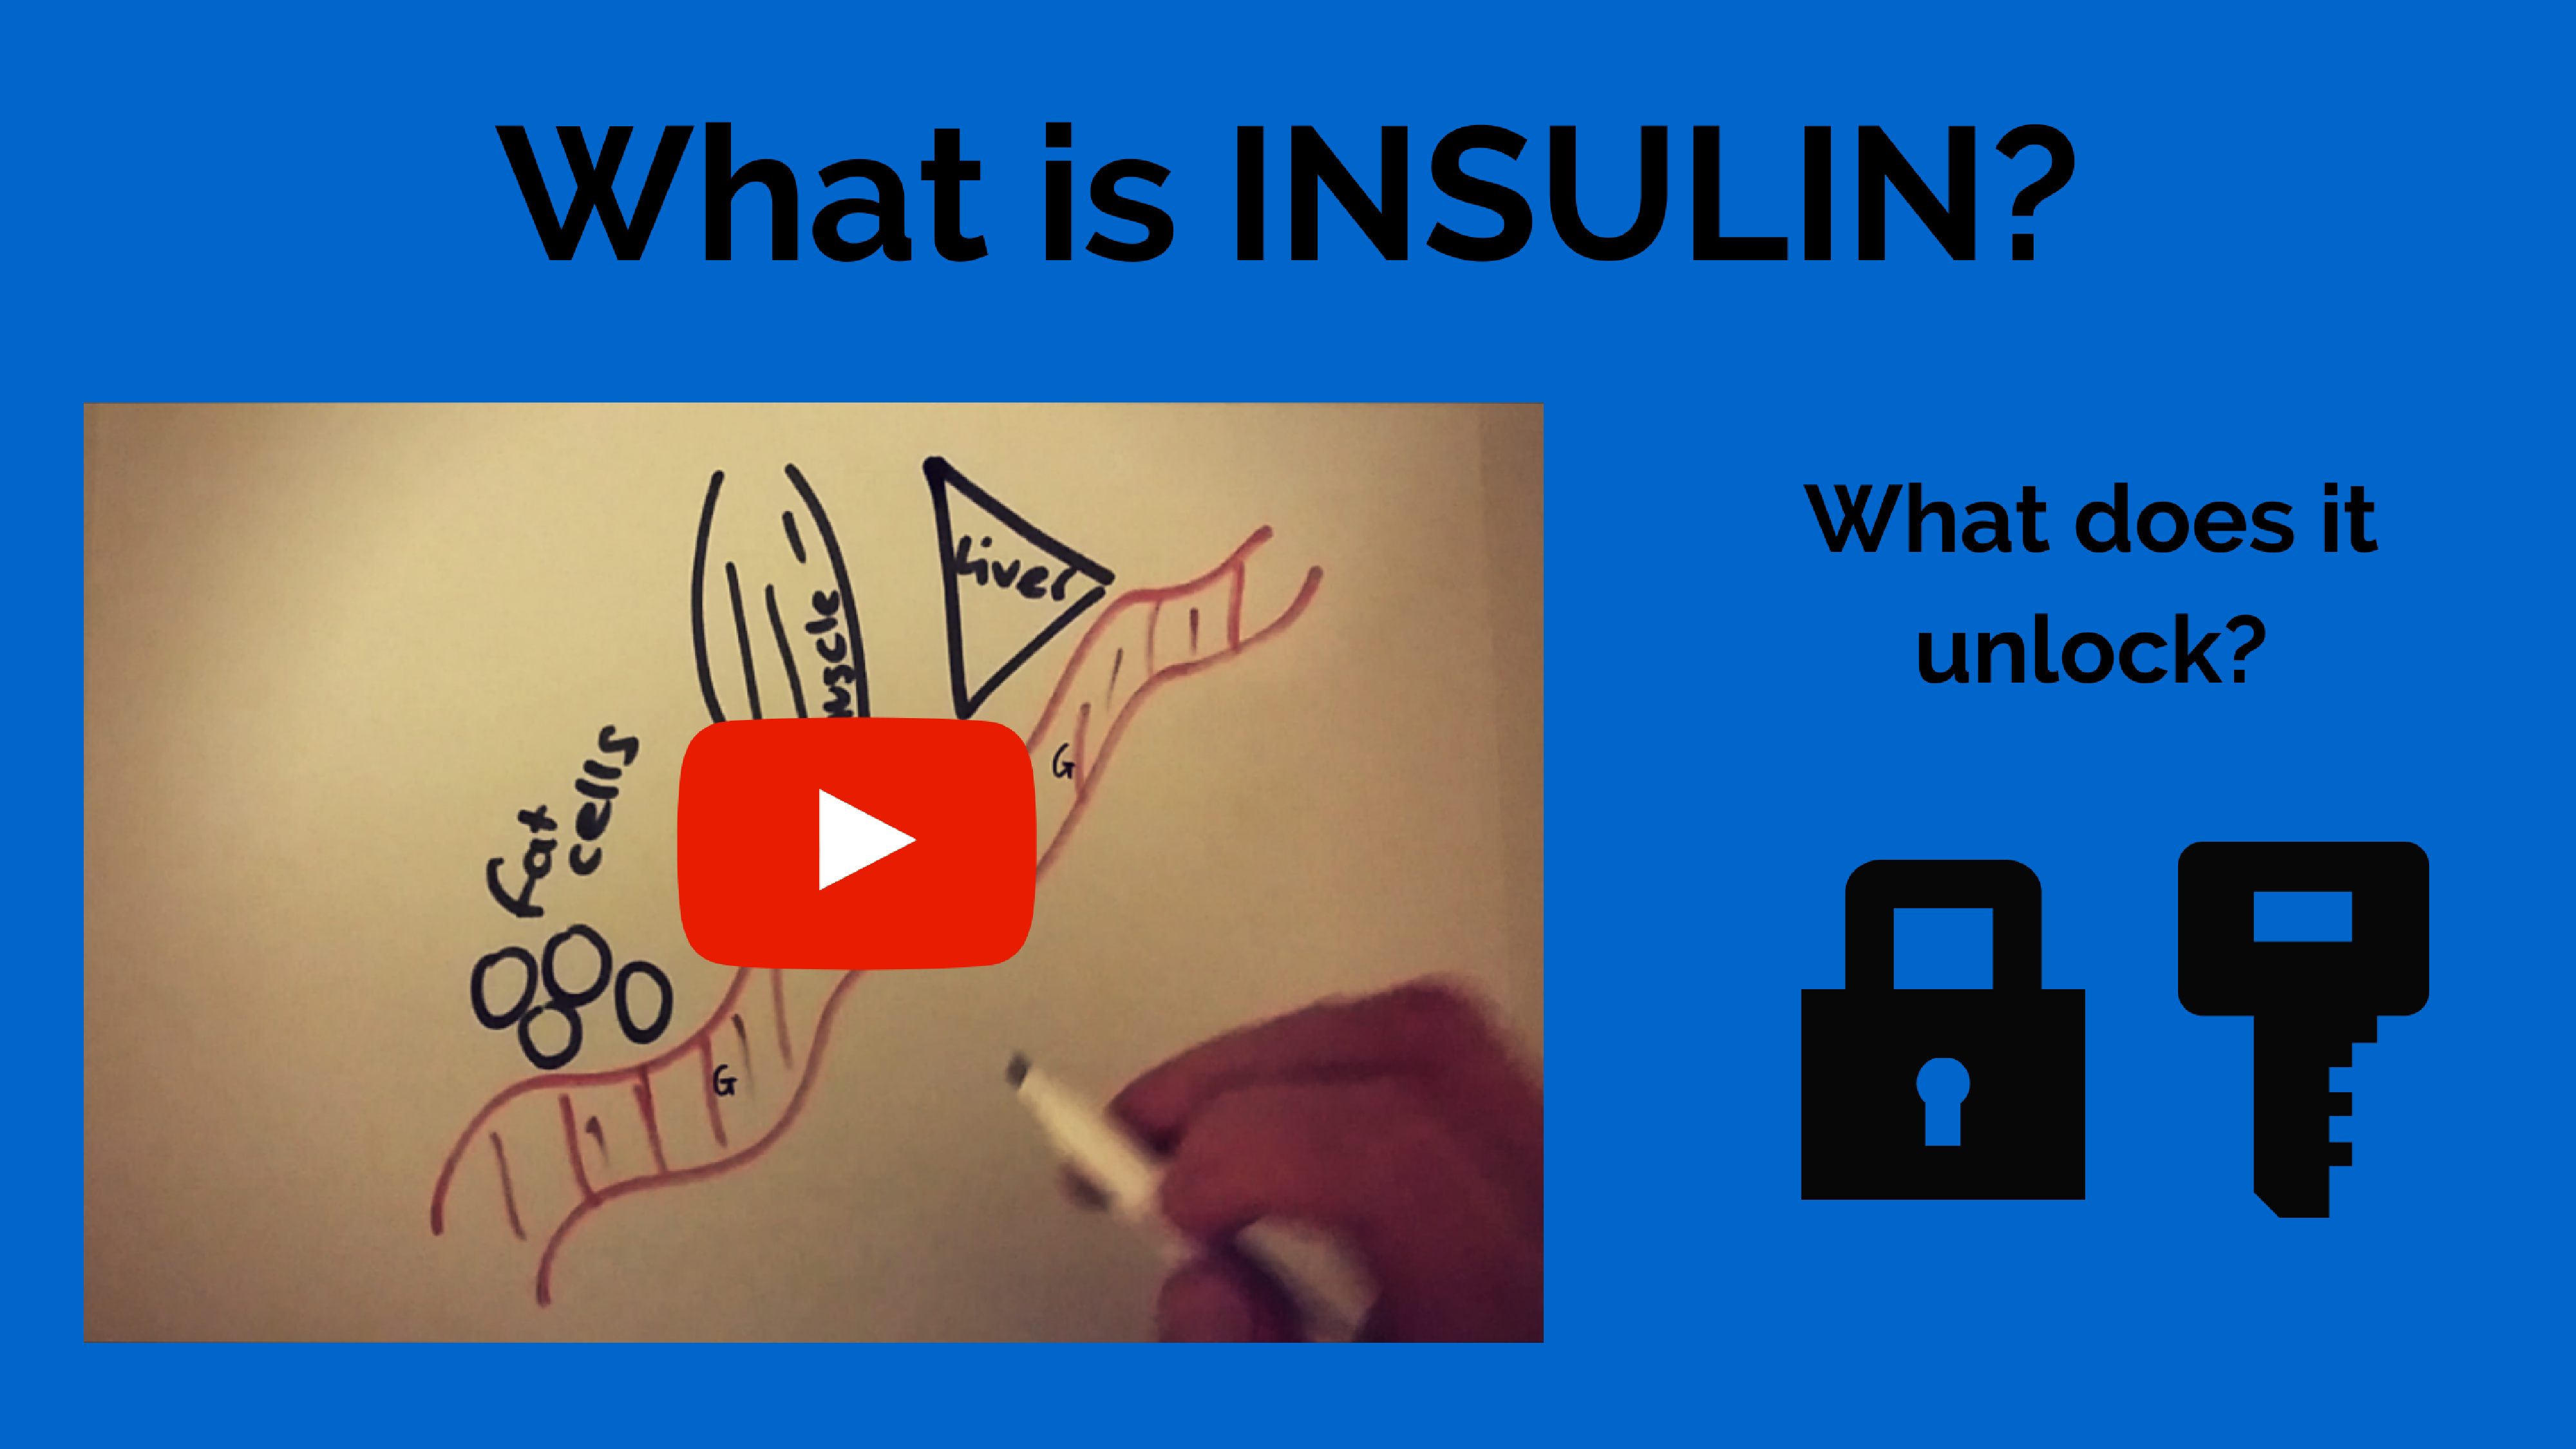 What is insulin - Anatomy and Physiology revision